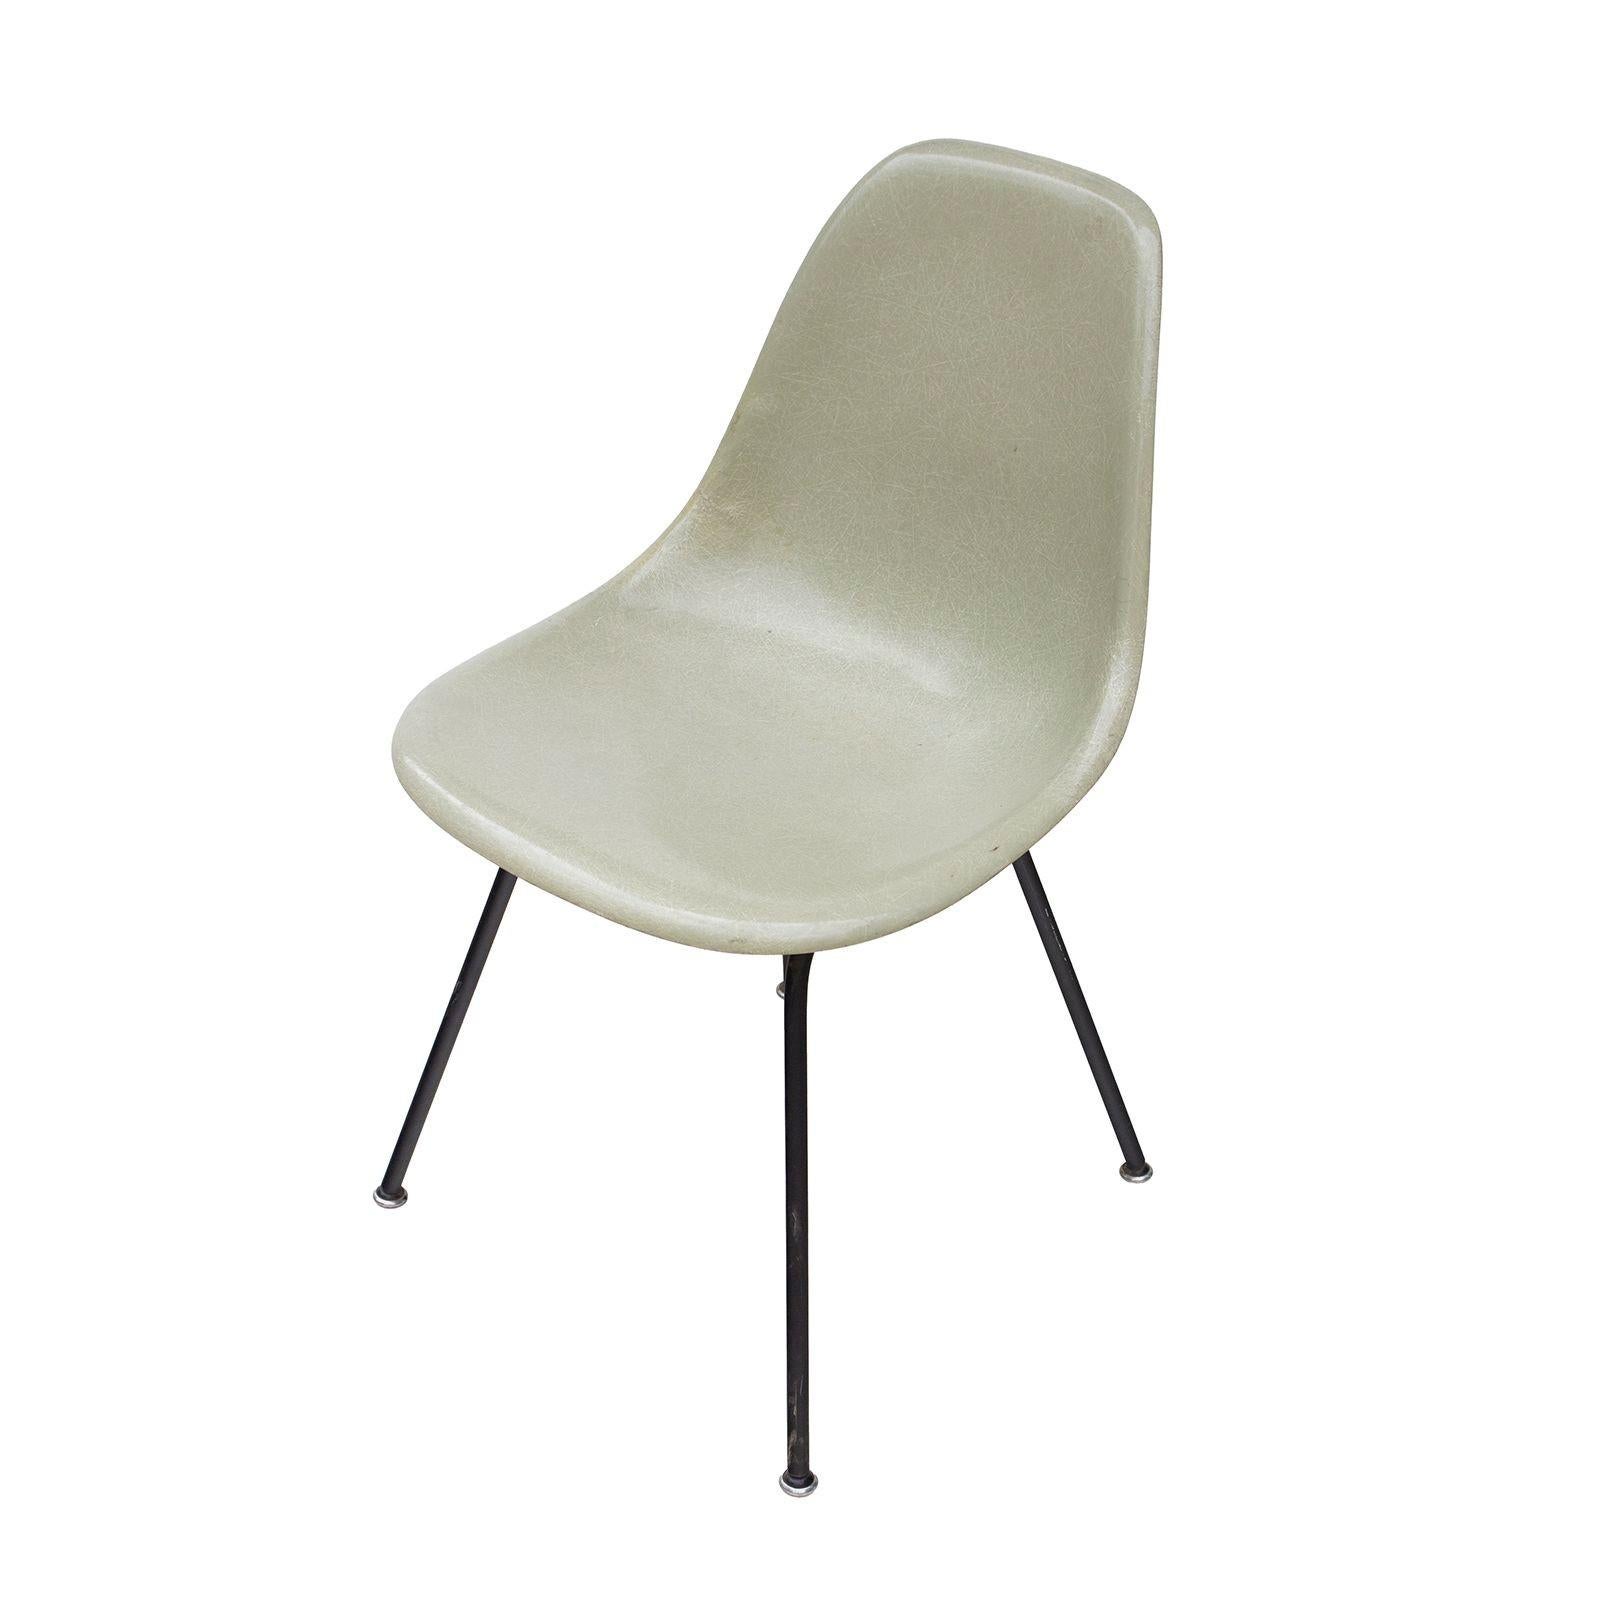 Mid-20th Century Herman Miller Eames Side Shell Chair in Seafoam Light on Black H Base For Sale